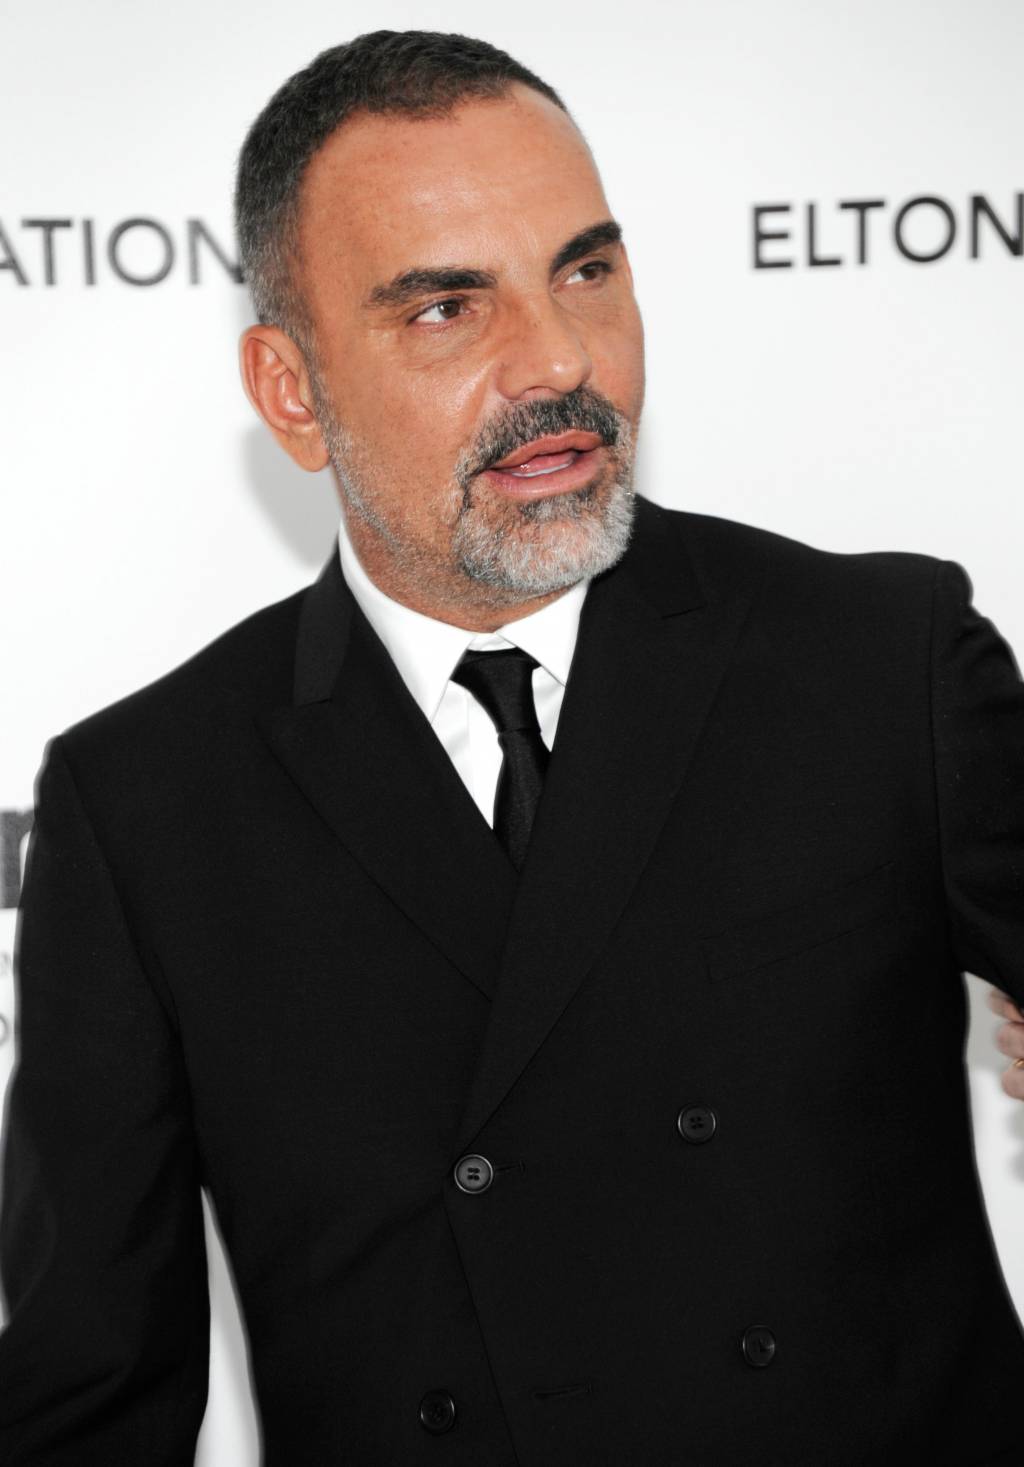 July 10, 2015: Ed Hardy designer and father of the tattoo shirt, Christian Audigier, passed away from bone cancer. He was 57. The French designer got his start making denim in his home country, eventually earning the name "King of Denim." In America, he made Von Dutch trucker hats a phenomenon among celebrities and regular Joes alike, before launching Ed Hardy.